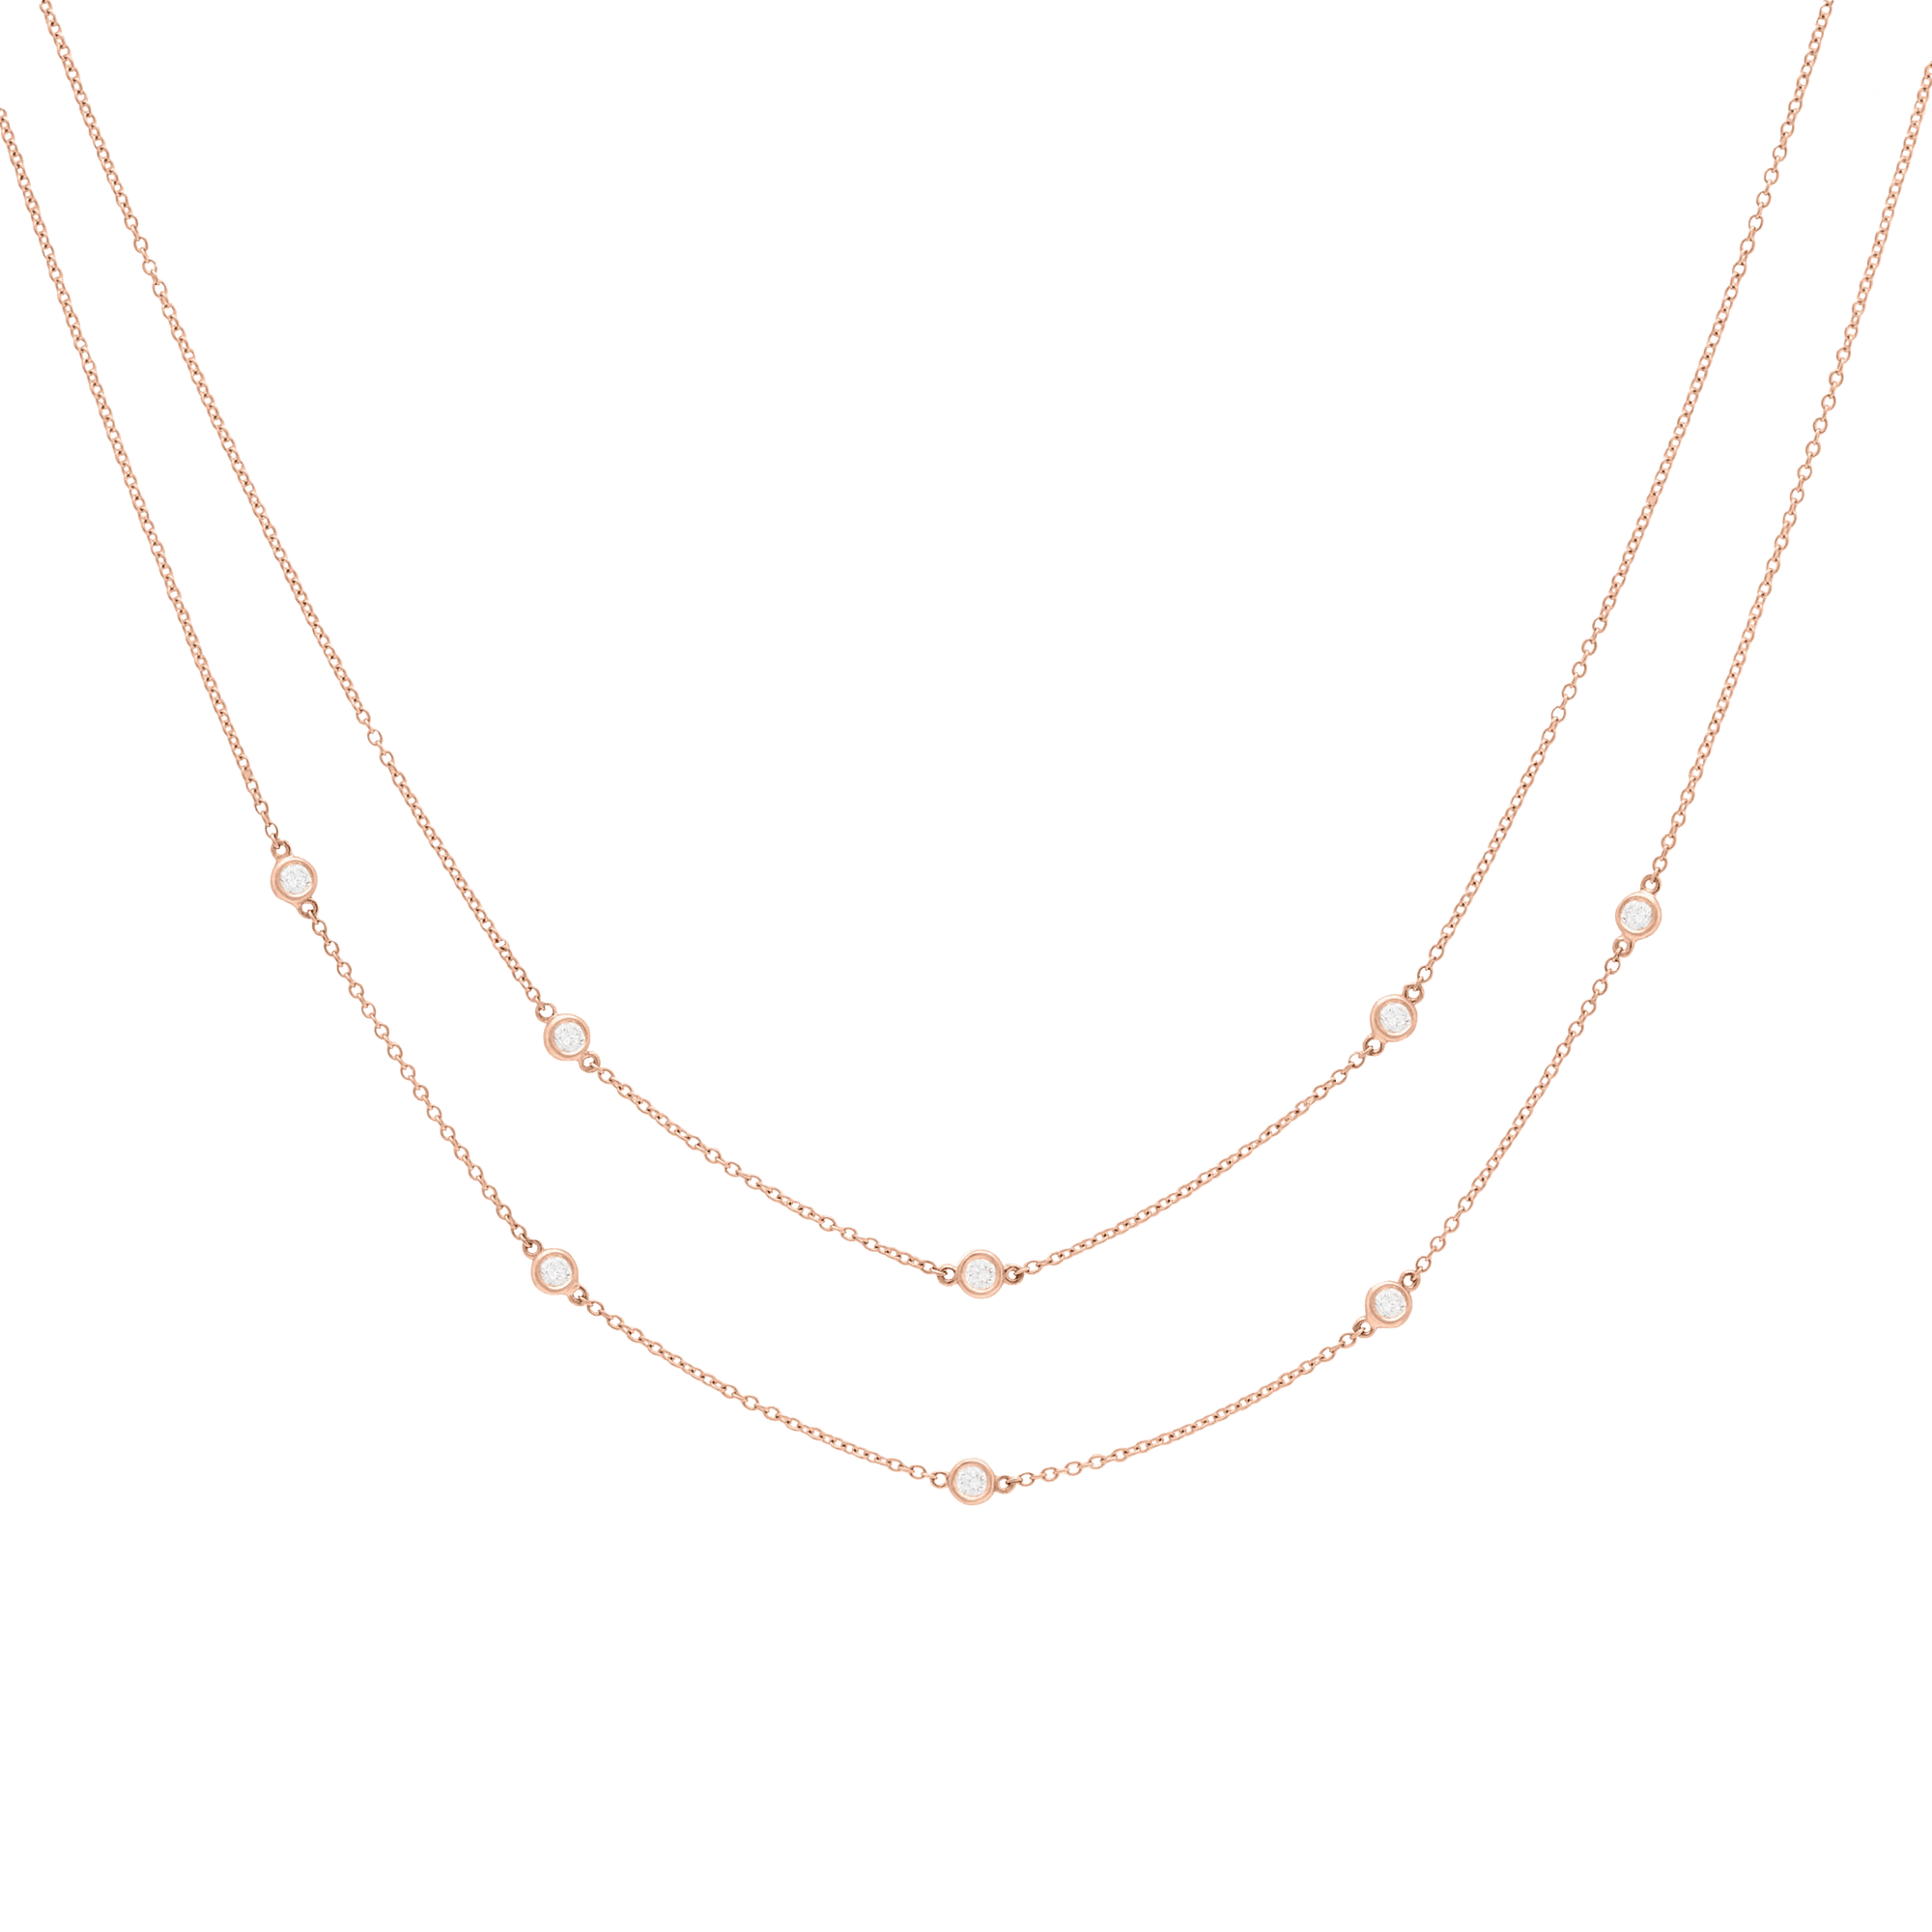 
					Zany_Shy_Moonphase-Necklace_Rose-Gold_Lab-Grown-Diamond_2500x_59efe3b6-d656-43e0-8598-d6eb36405e62.png